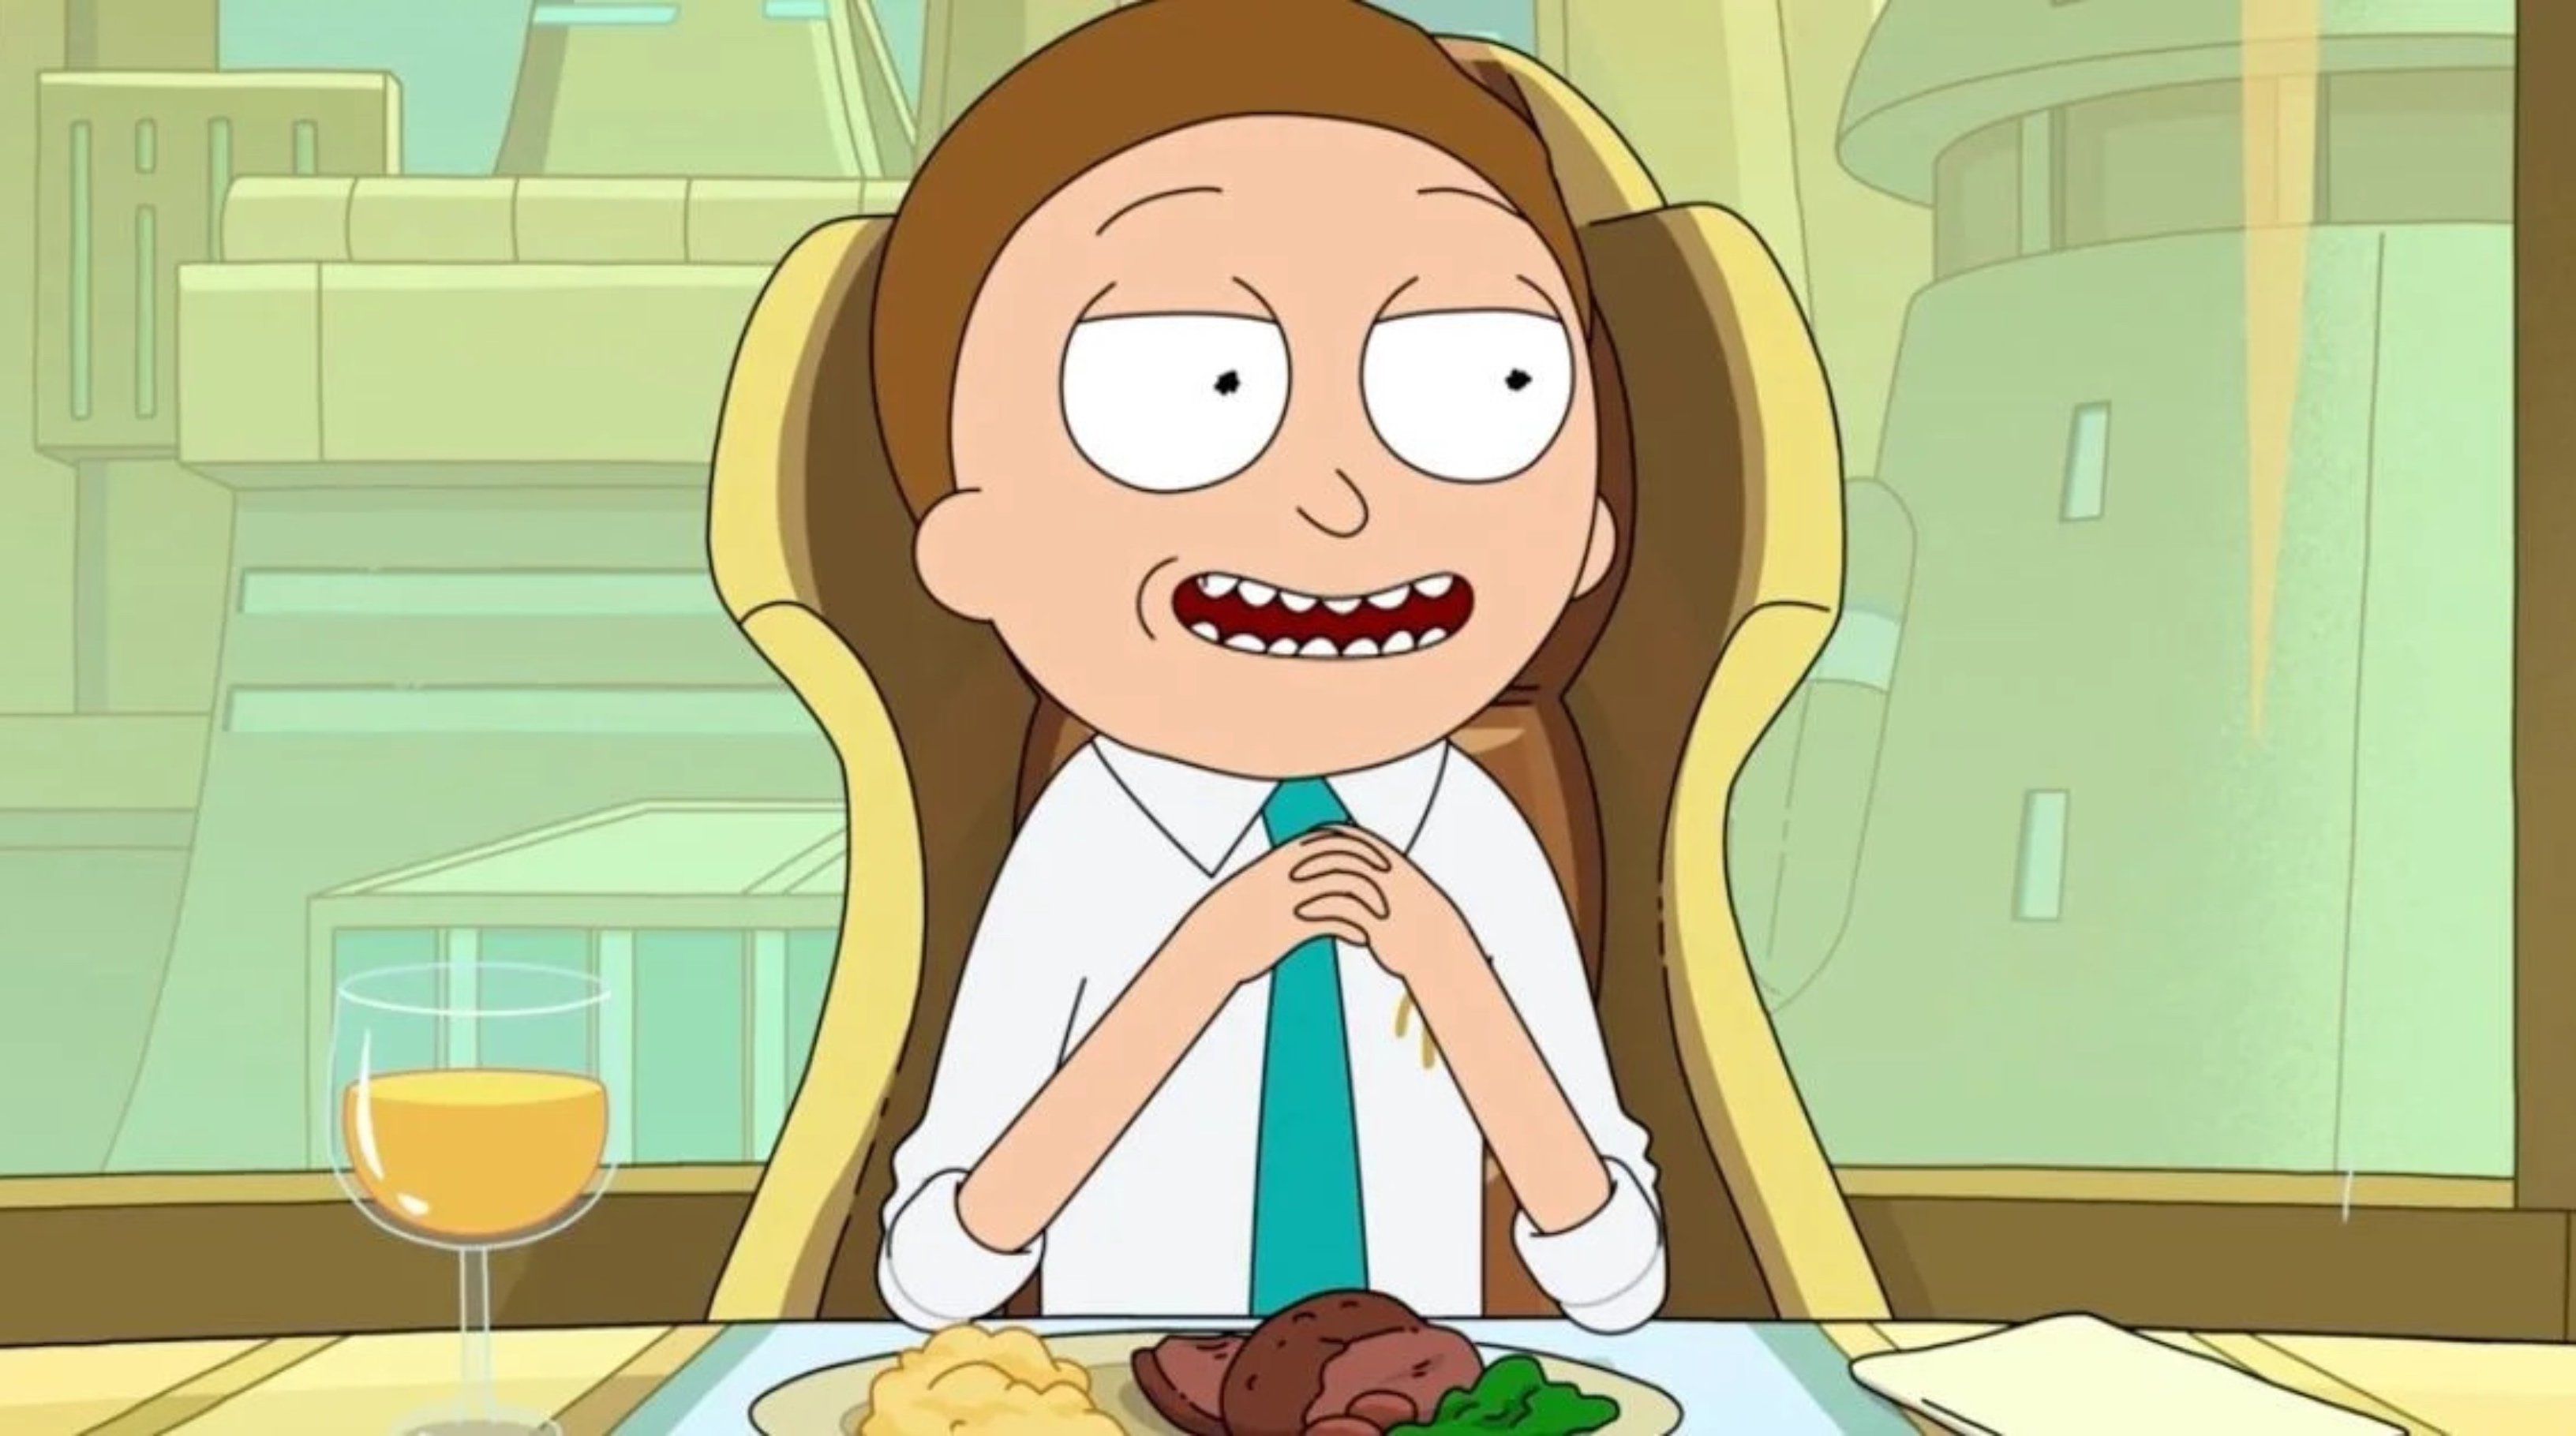 Evil Morty 'Rick and Morty' Season 5 wearing white dress shirt and tie